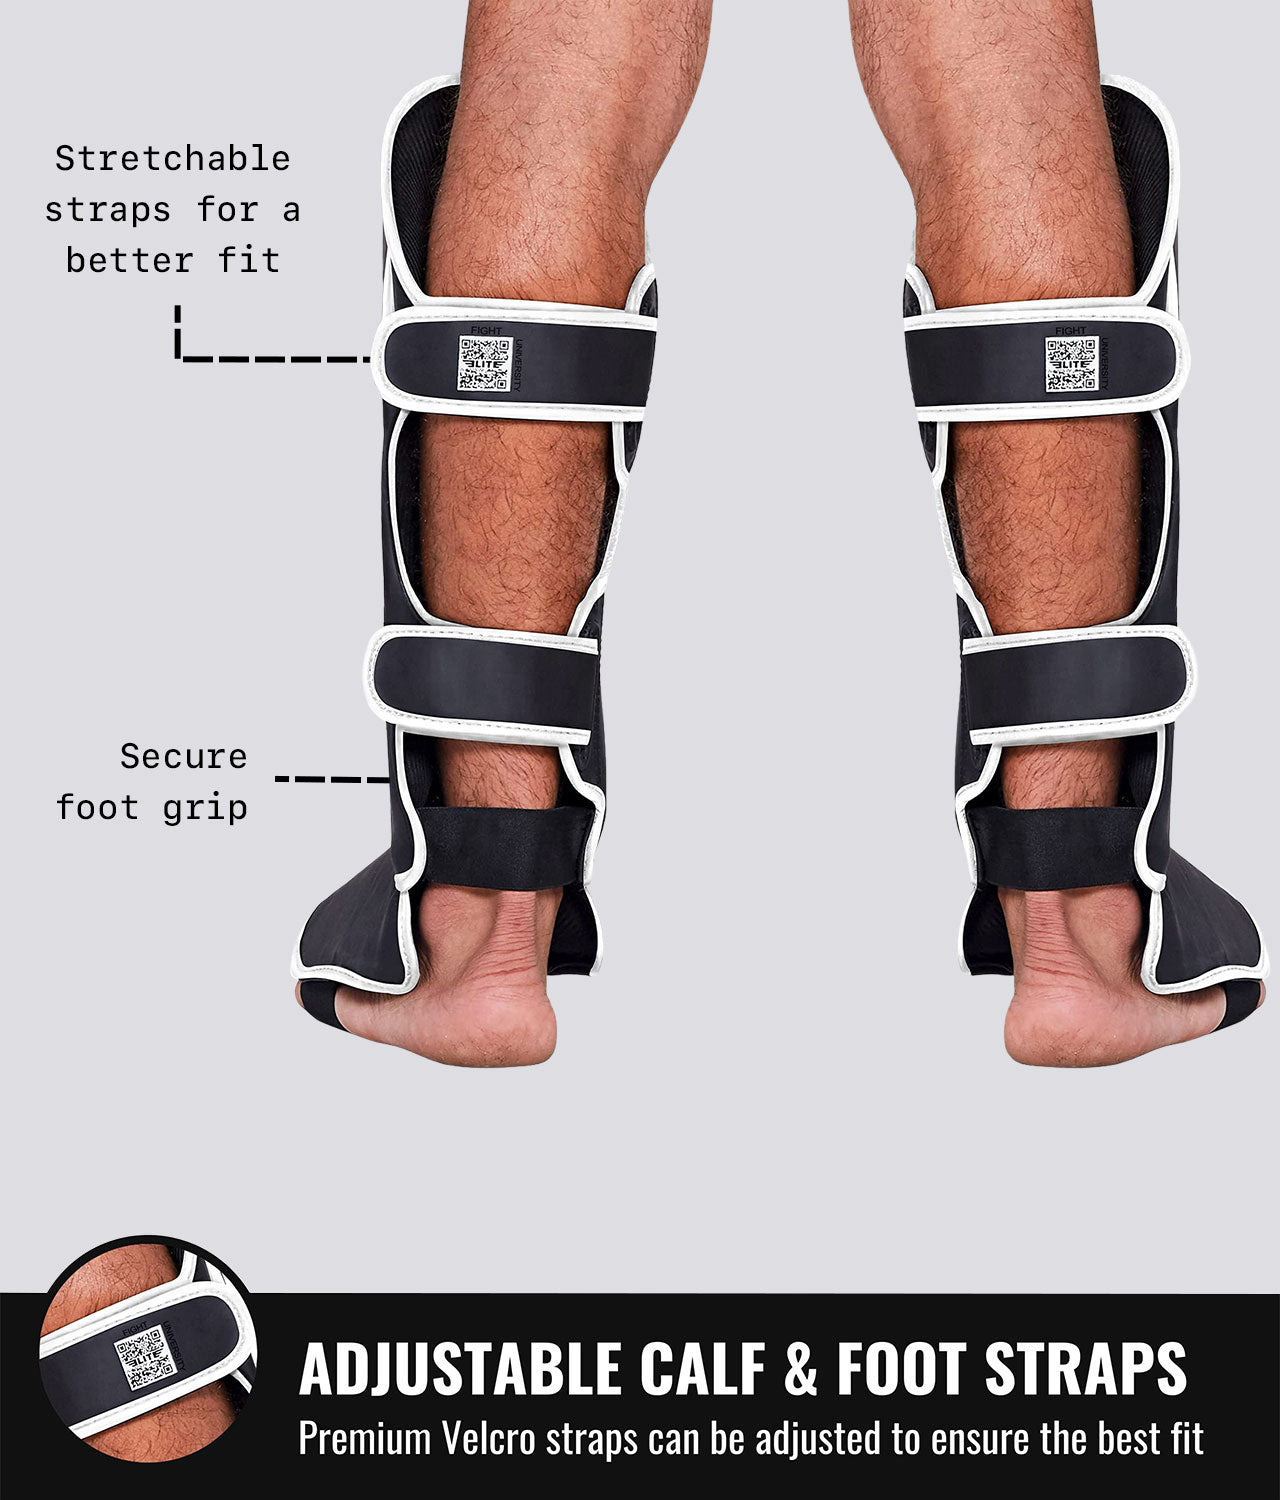 Elite Sports Adults' Star White Training Shin Guards Adjustable Calf & Foot Straps